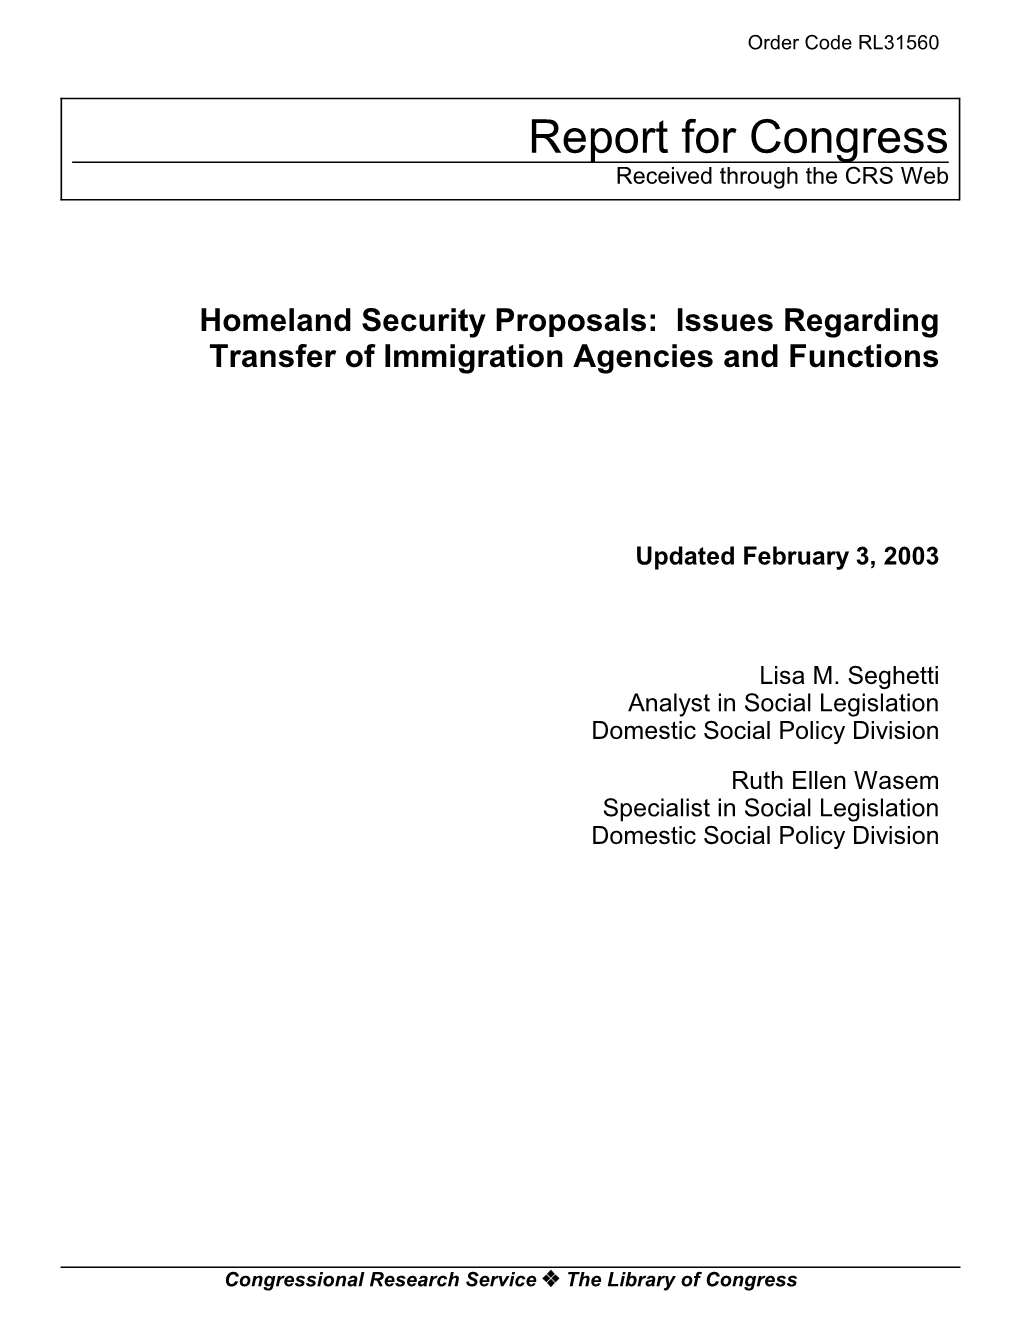 Homeland Security Proposals: Issues Regarding Transfer of Immigration Agencies and Functions